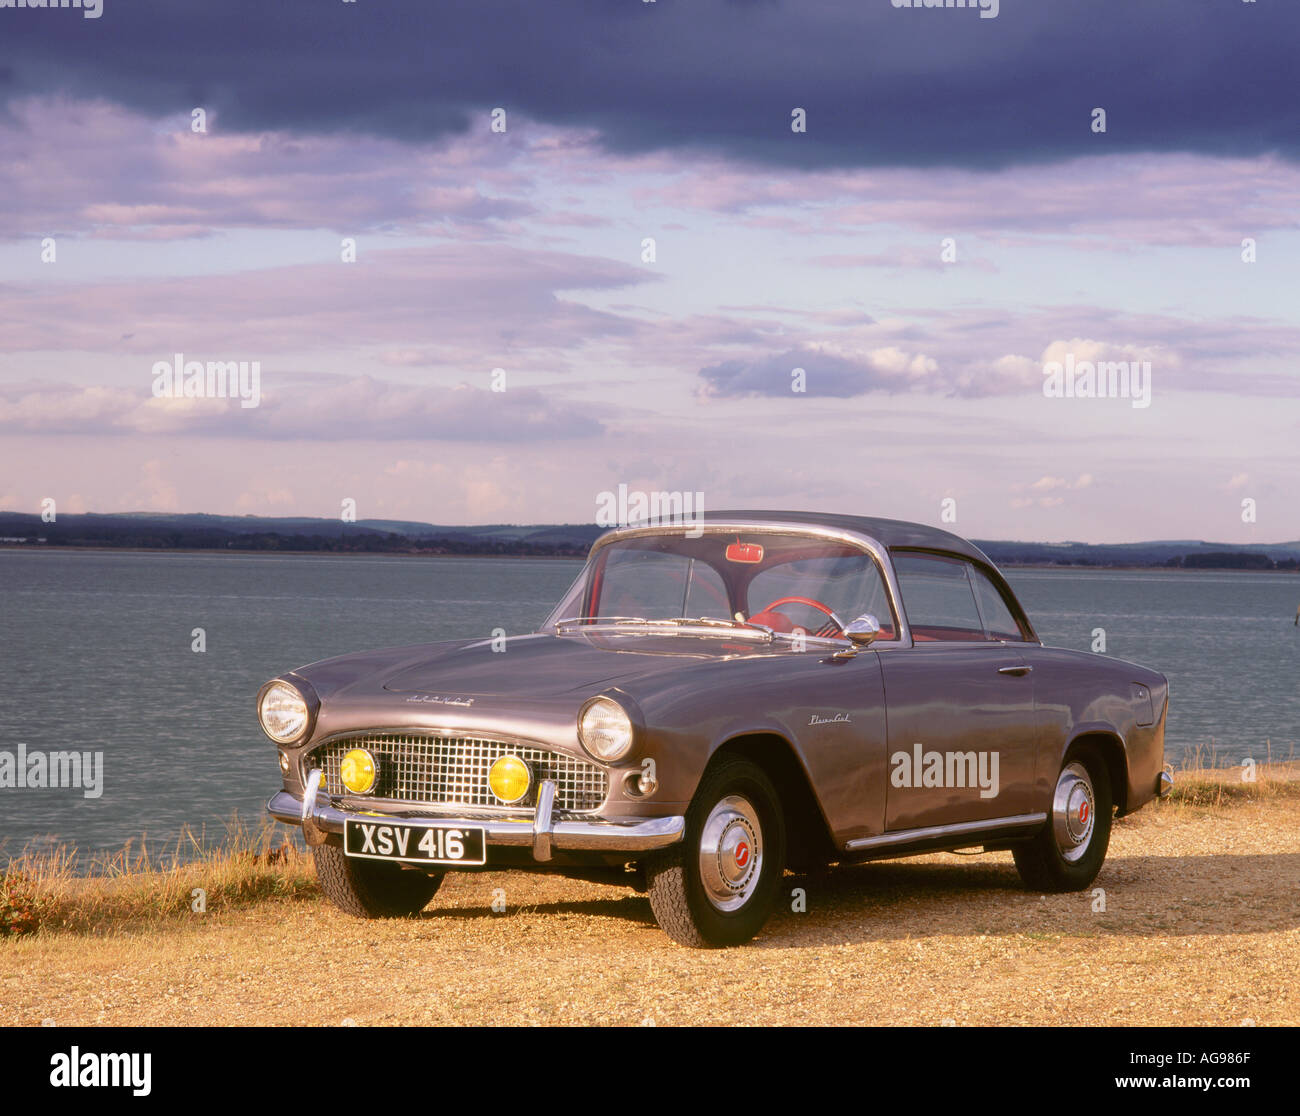 Presentation of the Simca Ariane car. Orly (France)